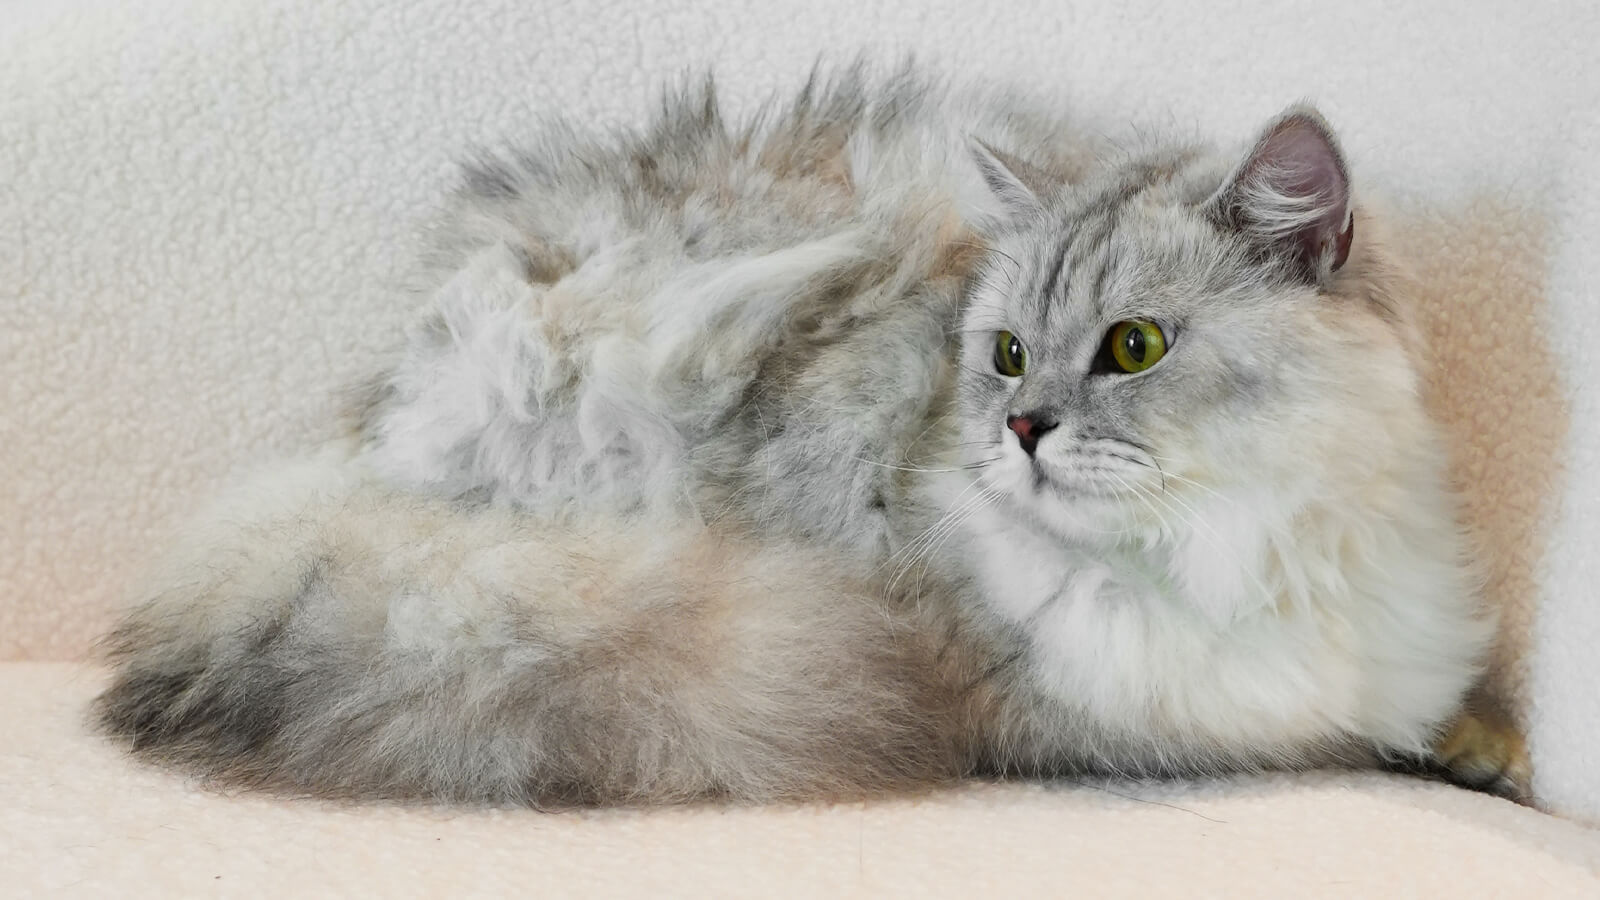 longhaired cats with lumpy hair need use dematting tool